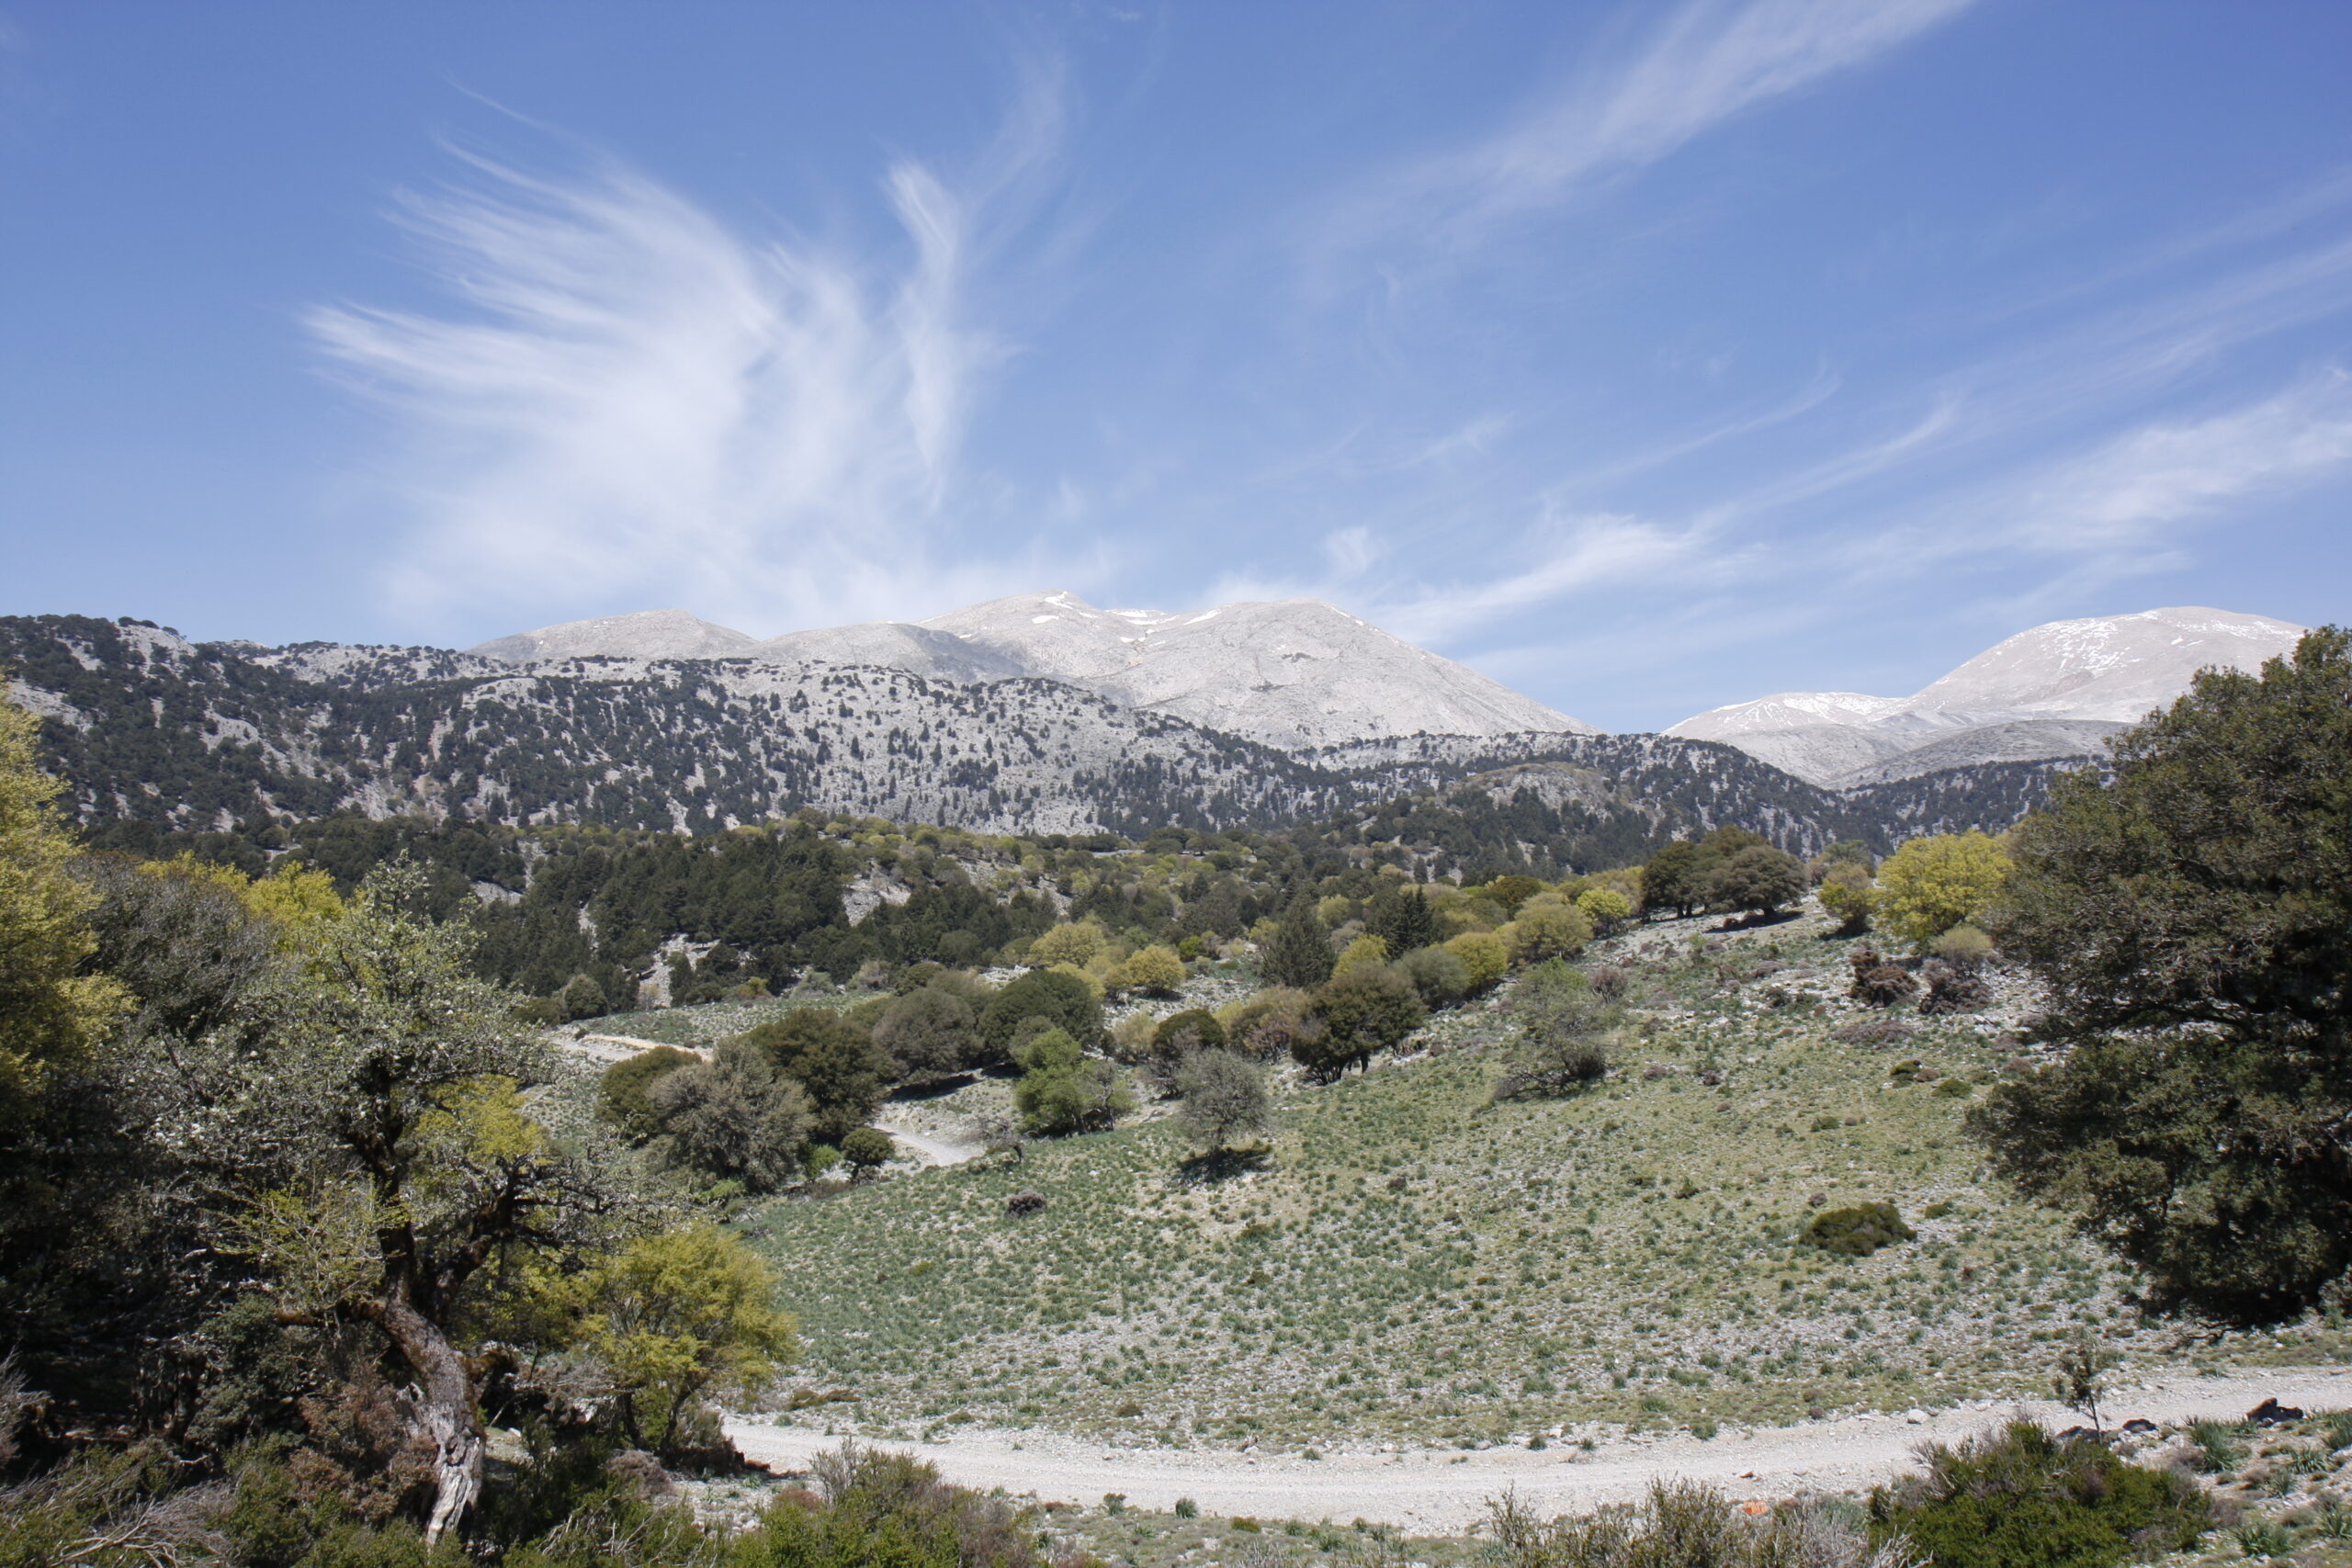 Restoring the Resilience of Mediterranean landscapes to wildfires